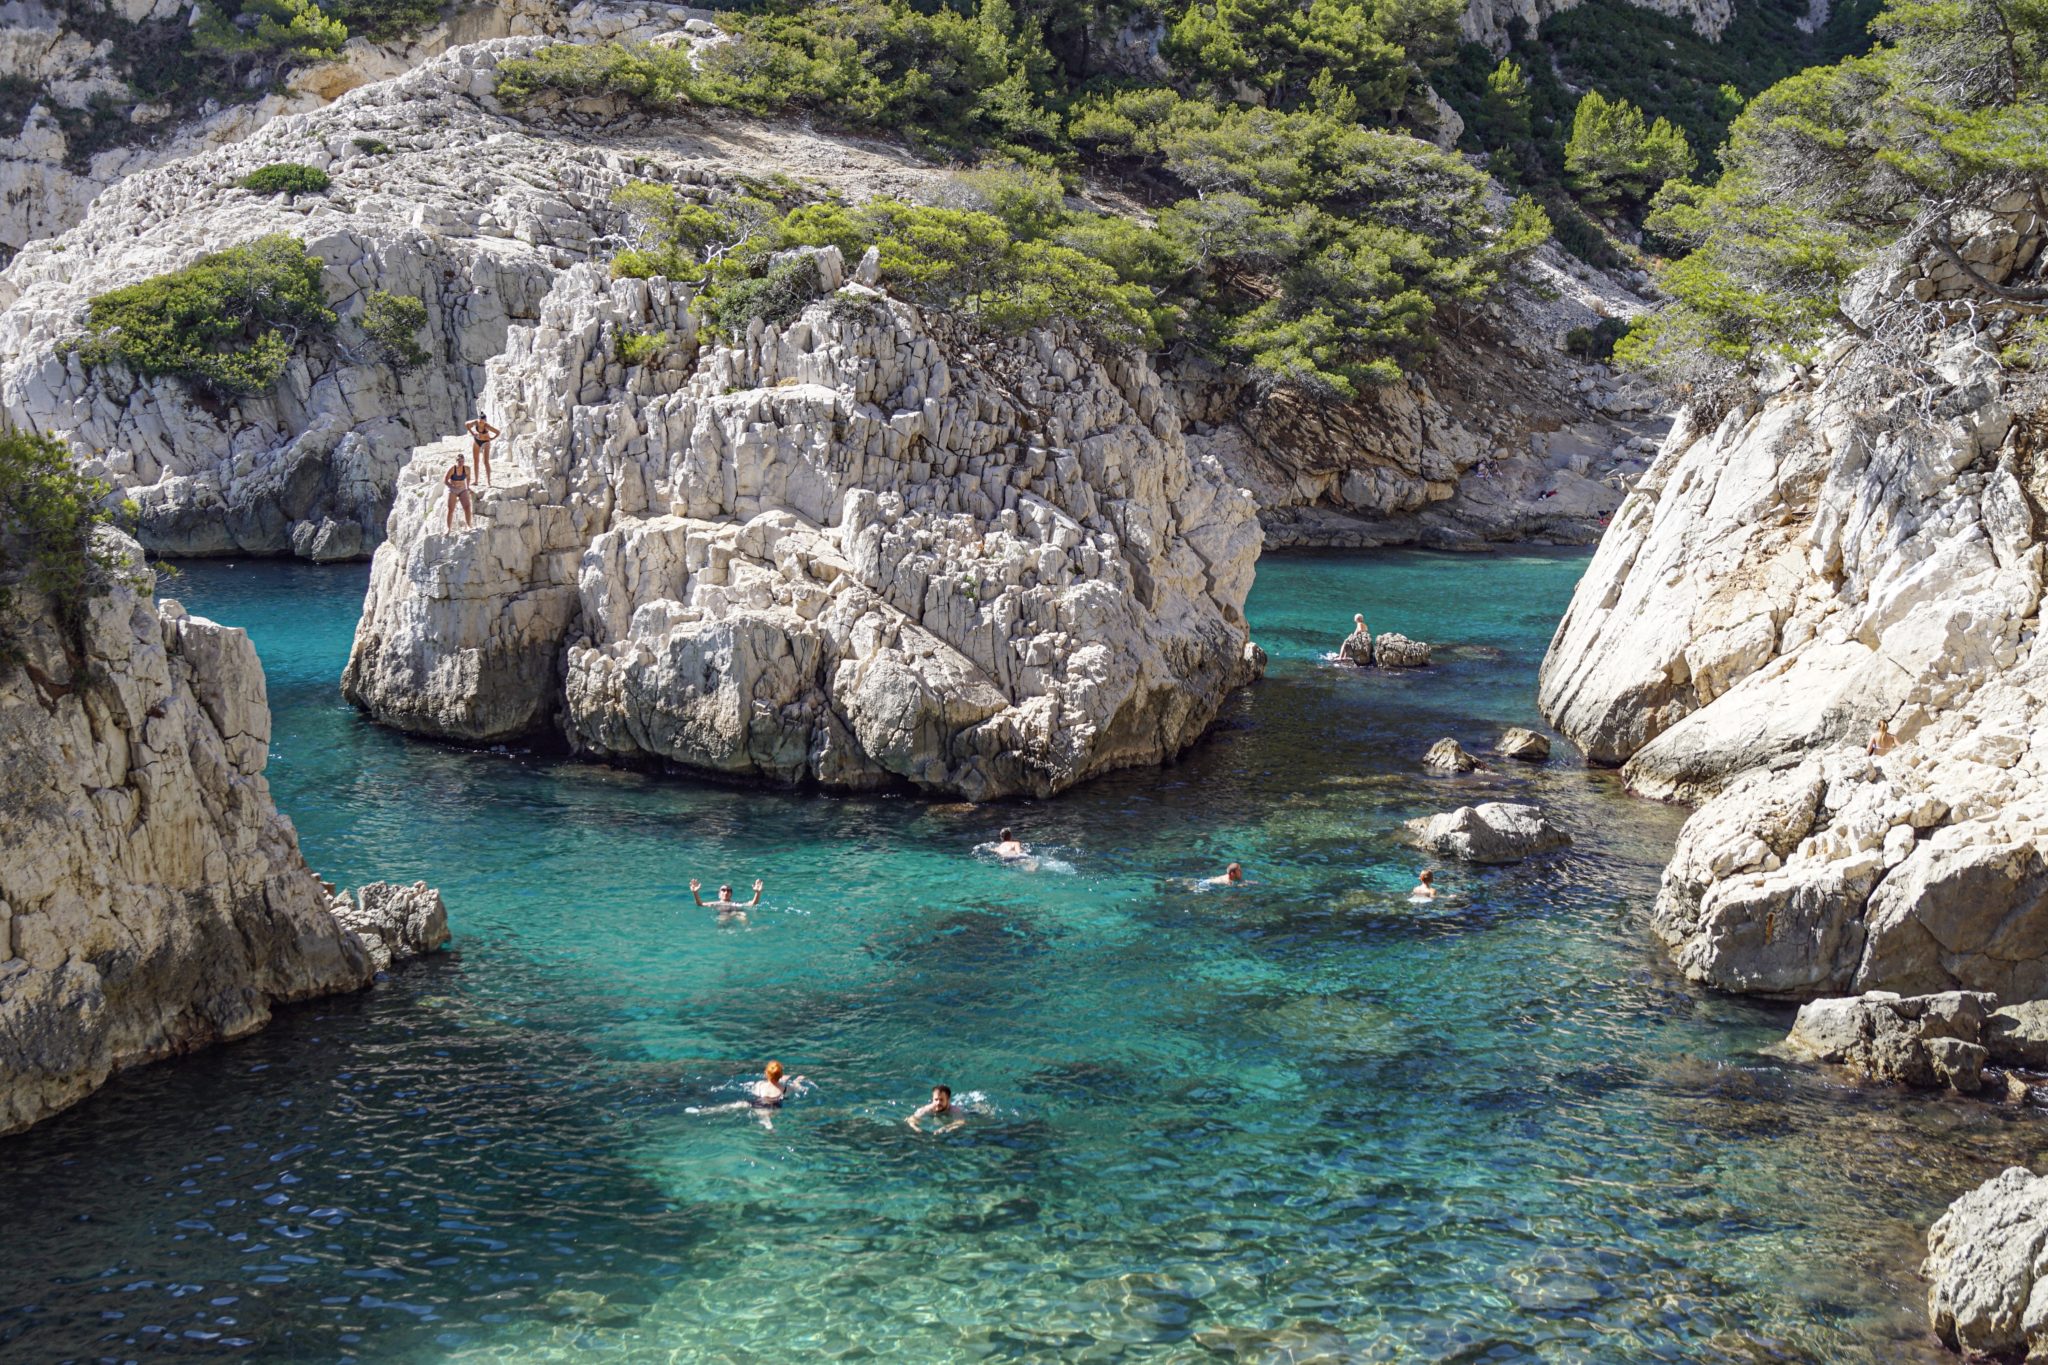 Park Narodowy Calanques